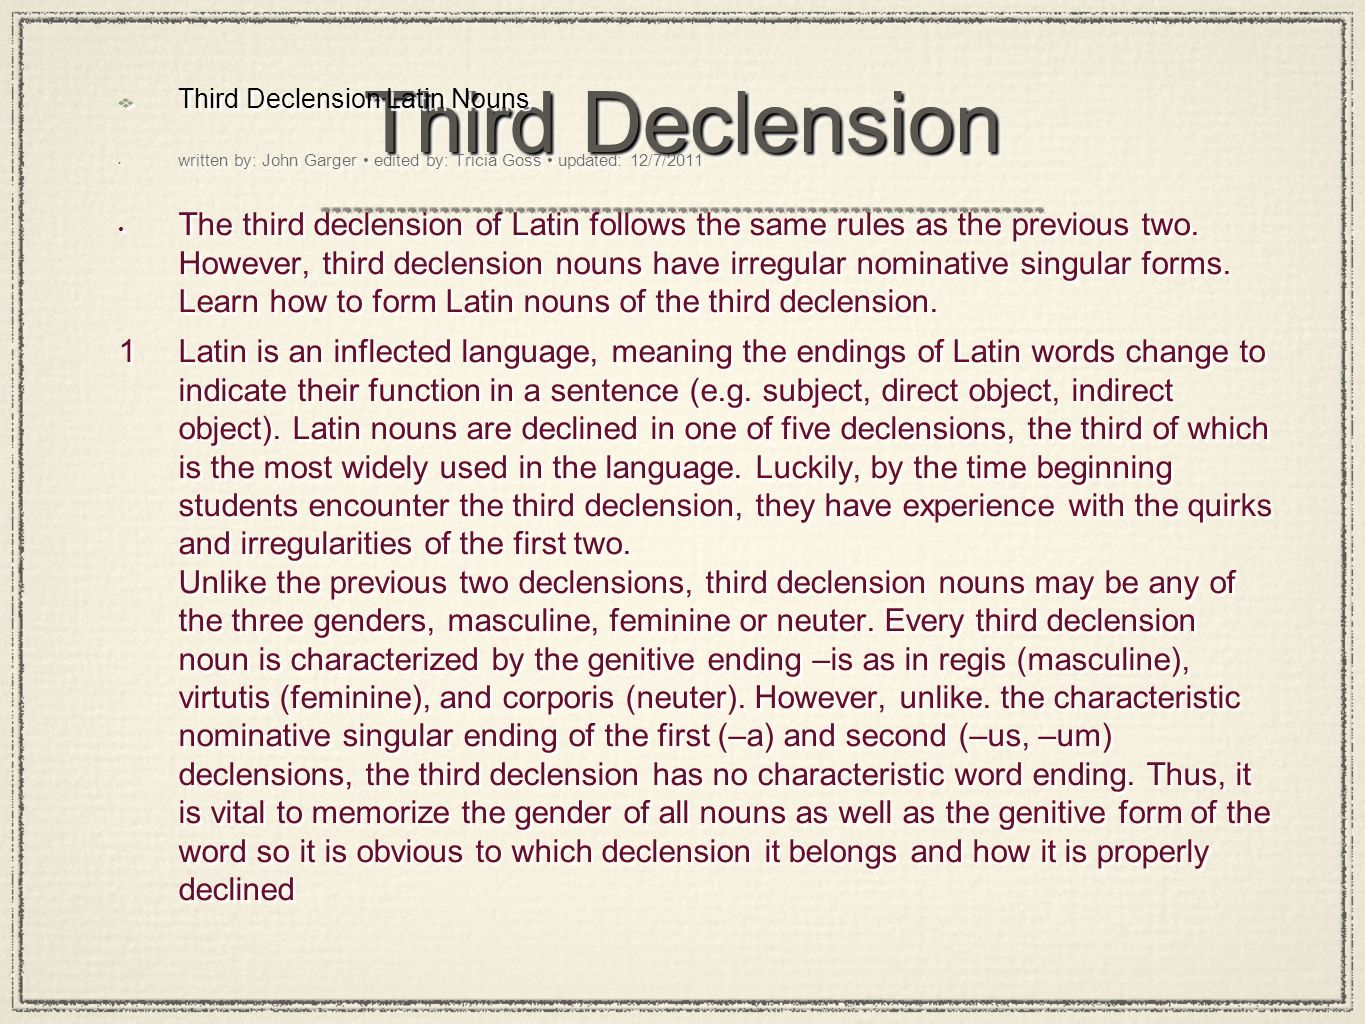 Third Declension Third Declension Latin Nouns written by: John Garger edited by: Tricia Goss updated: 12/7/2011 The third declension of Latin follows the same rules as the previous two.